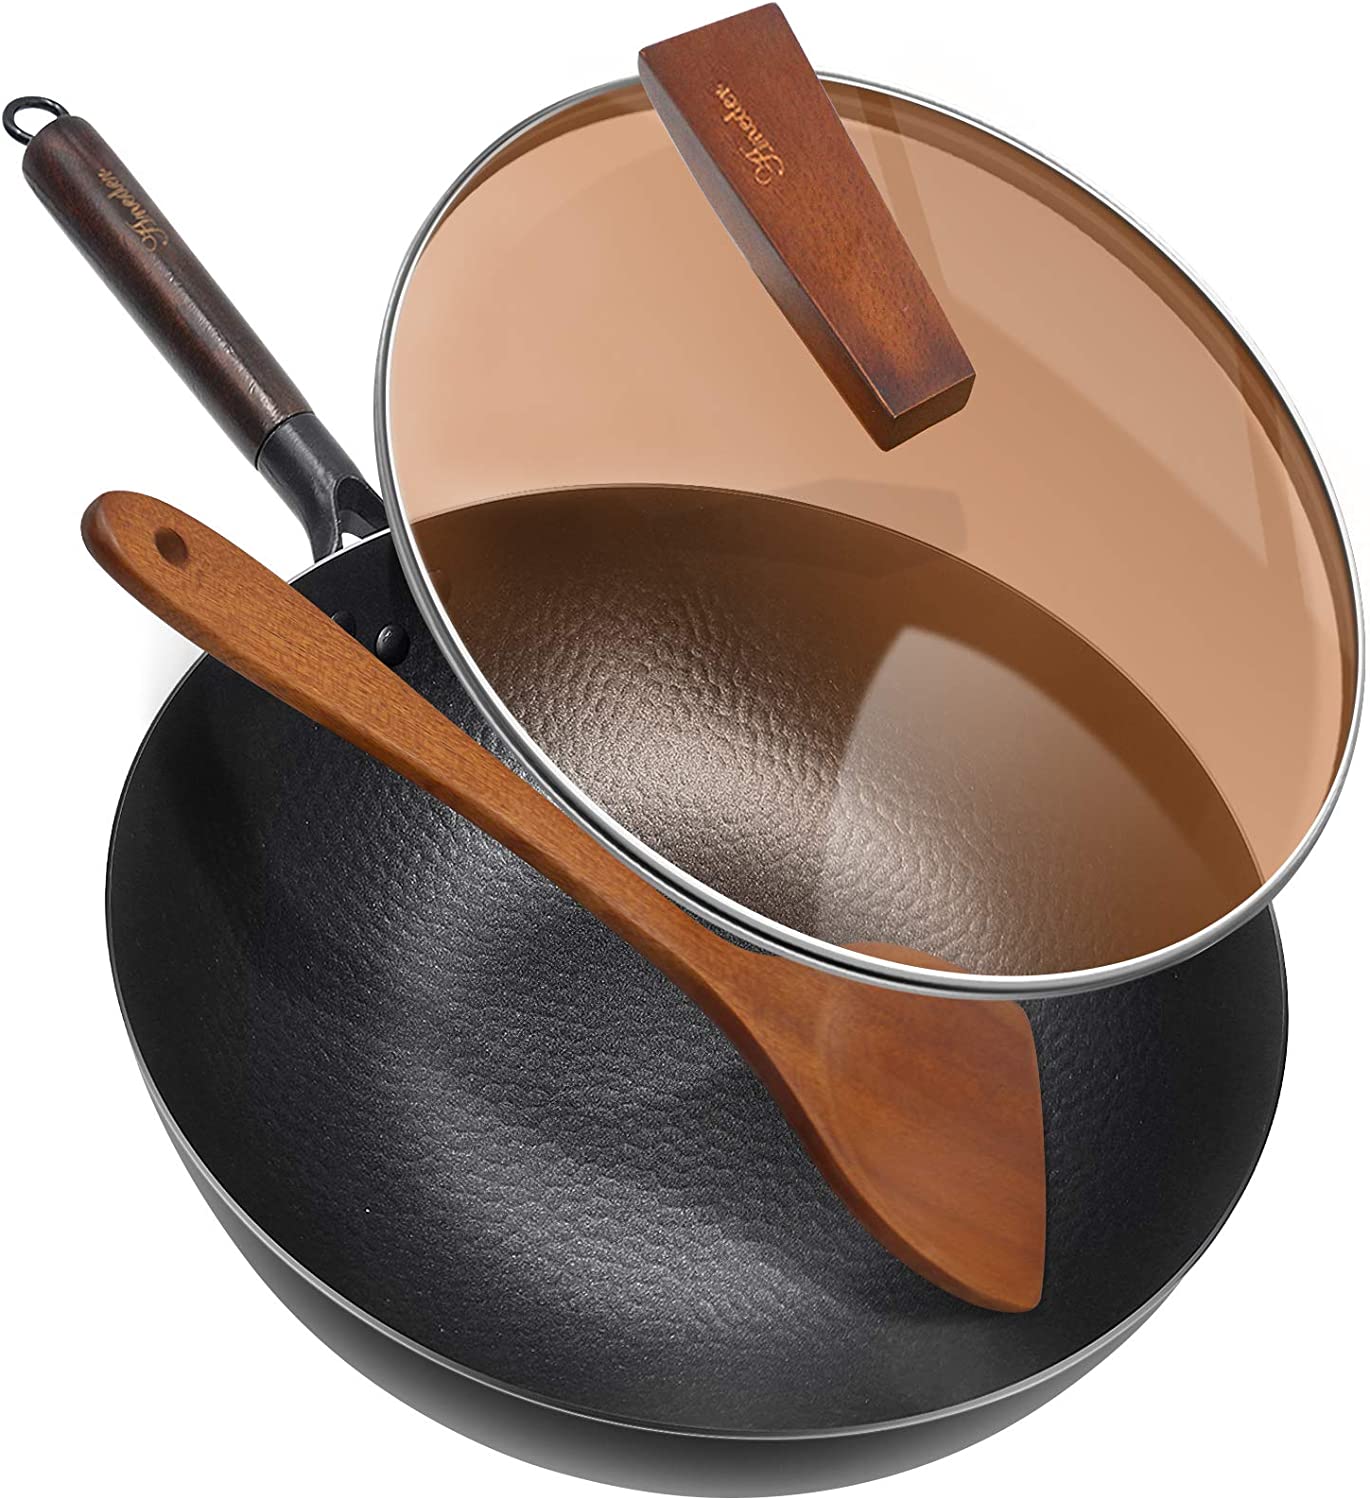 https://discounttoday.net/wp-content/uploads/2022/12/ANEDER-Carbon-Steel-Wok-Pan-with-Lid-Wood-Spatula-12.5-Cast-Iron-Stir-Fry-Pan-with-Flat-Bottom-and-Wooden-Handle-for-Electric-Induction-and-Gas-Stoves.jpg